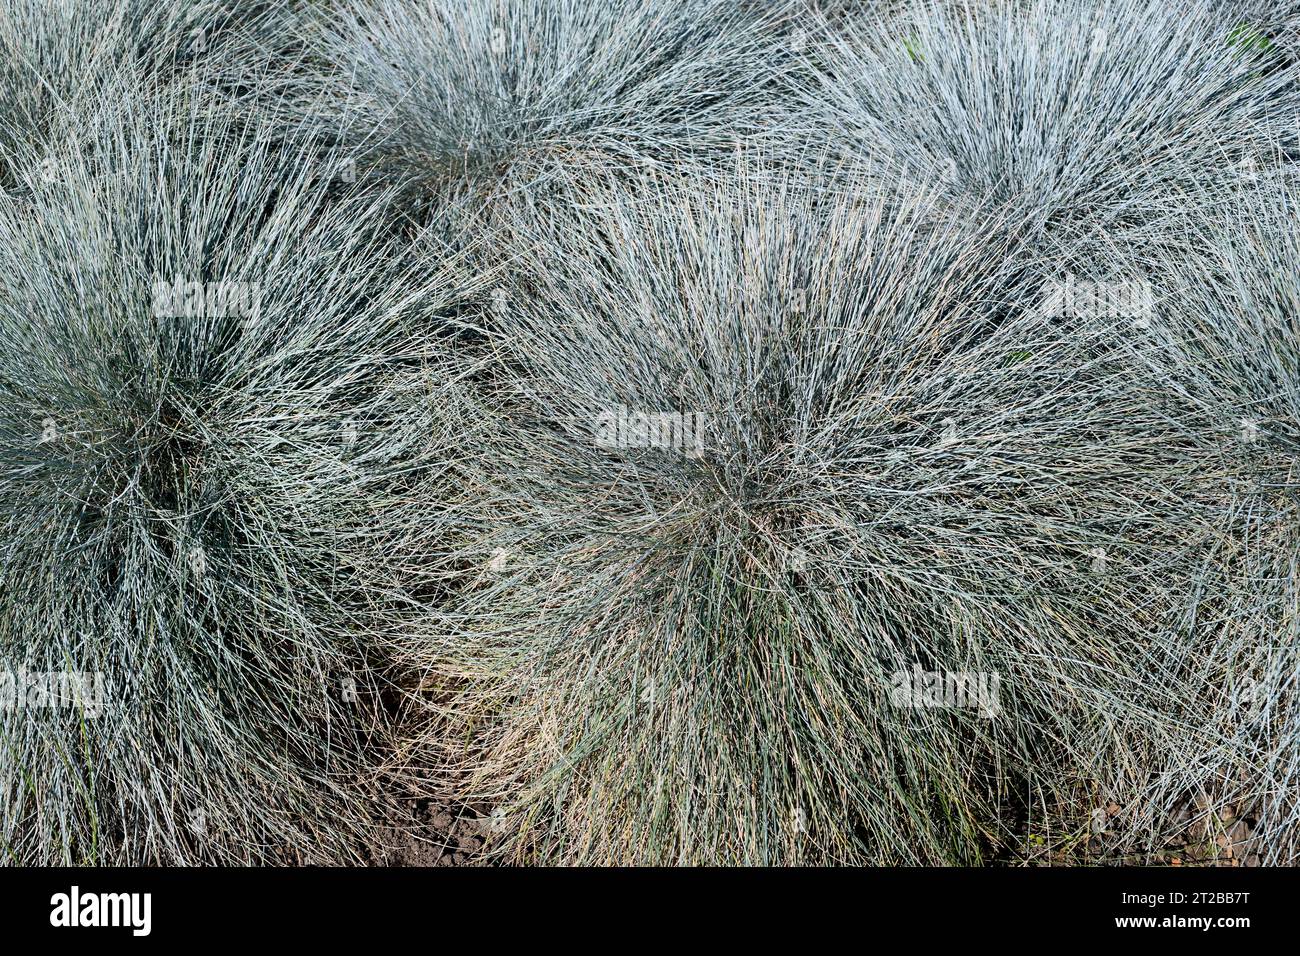 Blue fescue (Festuca glauca) is a perennial herb native to Europe. Stock Photo